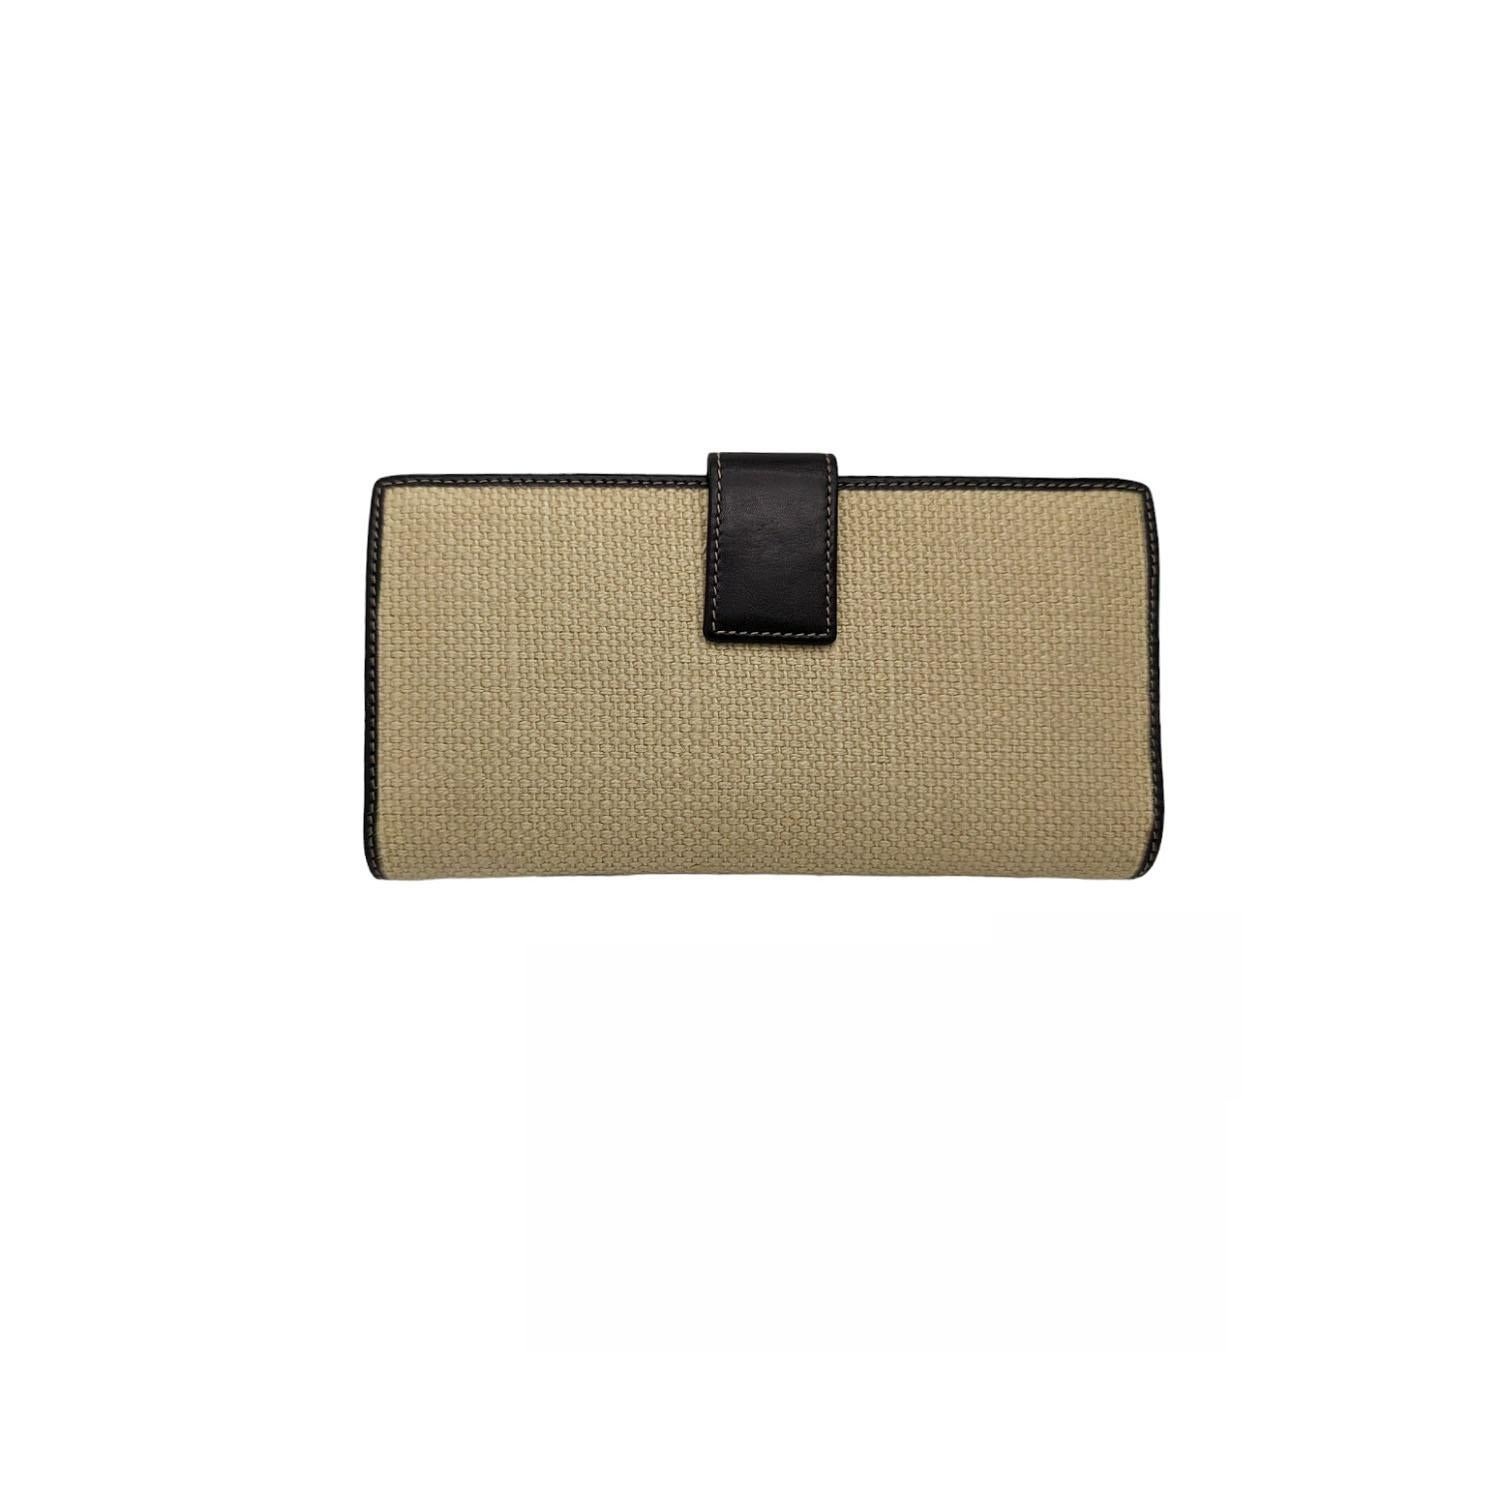 This Gucci Woven Linen Horsebit Continental Flap Wallet is a chic way to organize your essentials like your bills, credit cards and plenty of coins. It features durable brown leather with gold-tone horsebit details and a flap closure.

Designer: